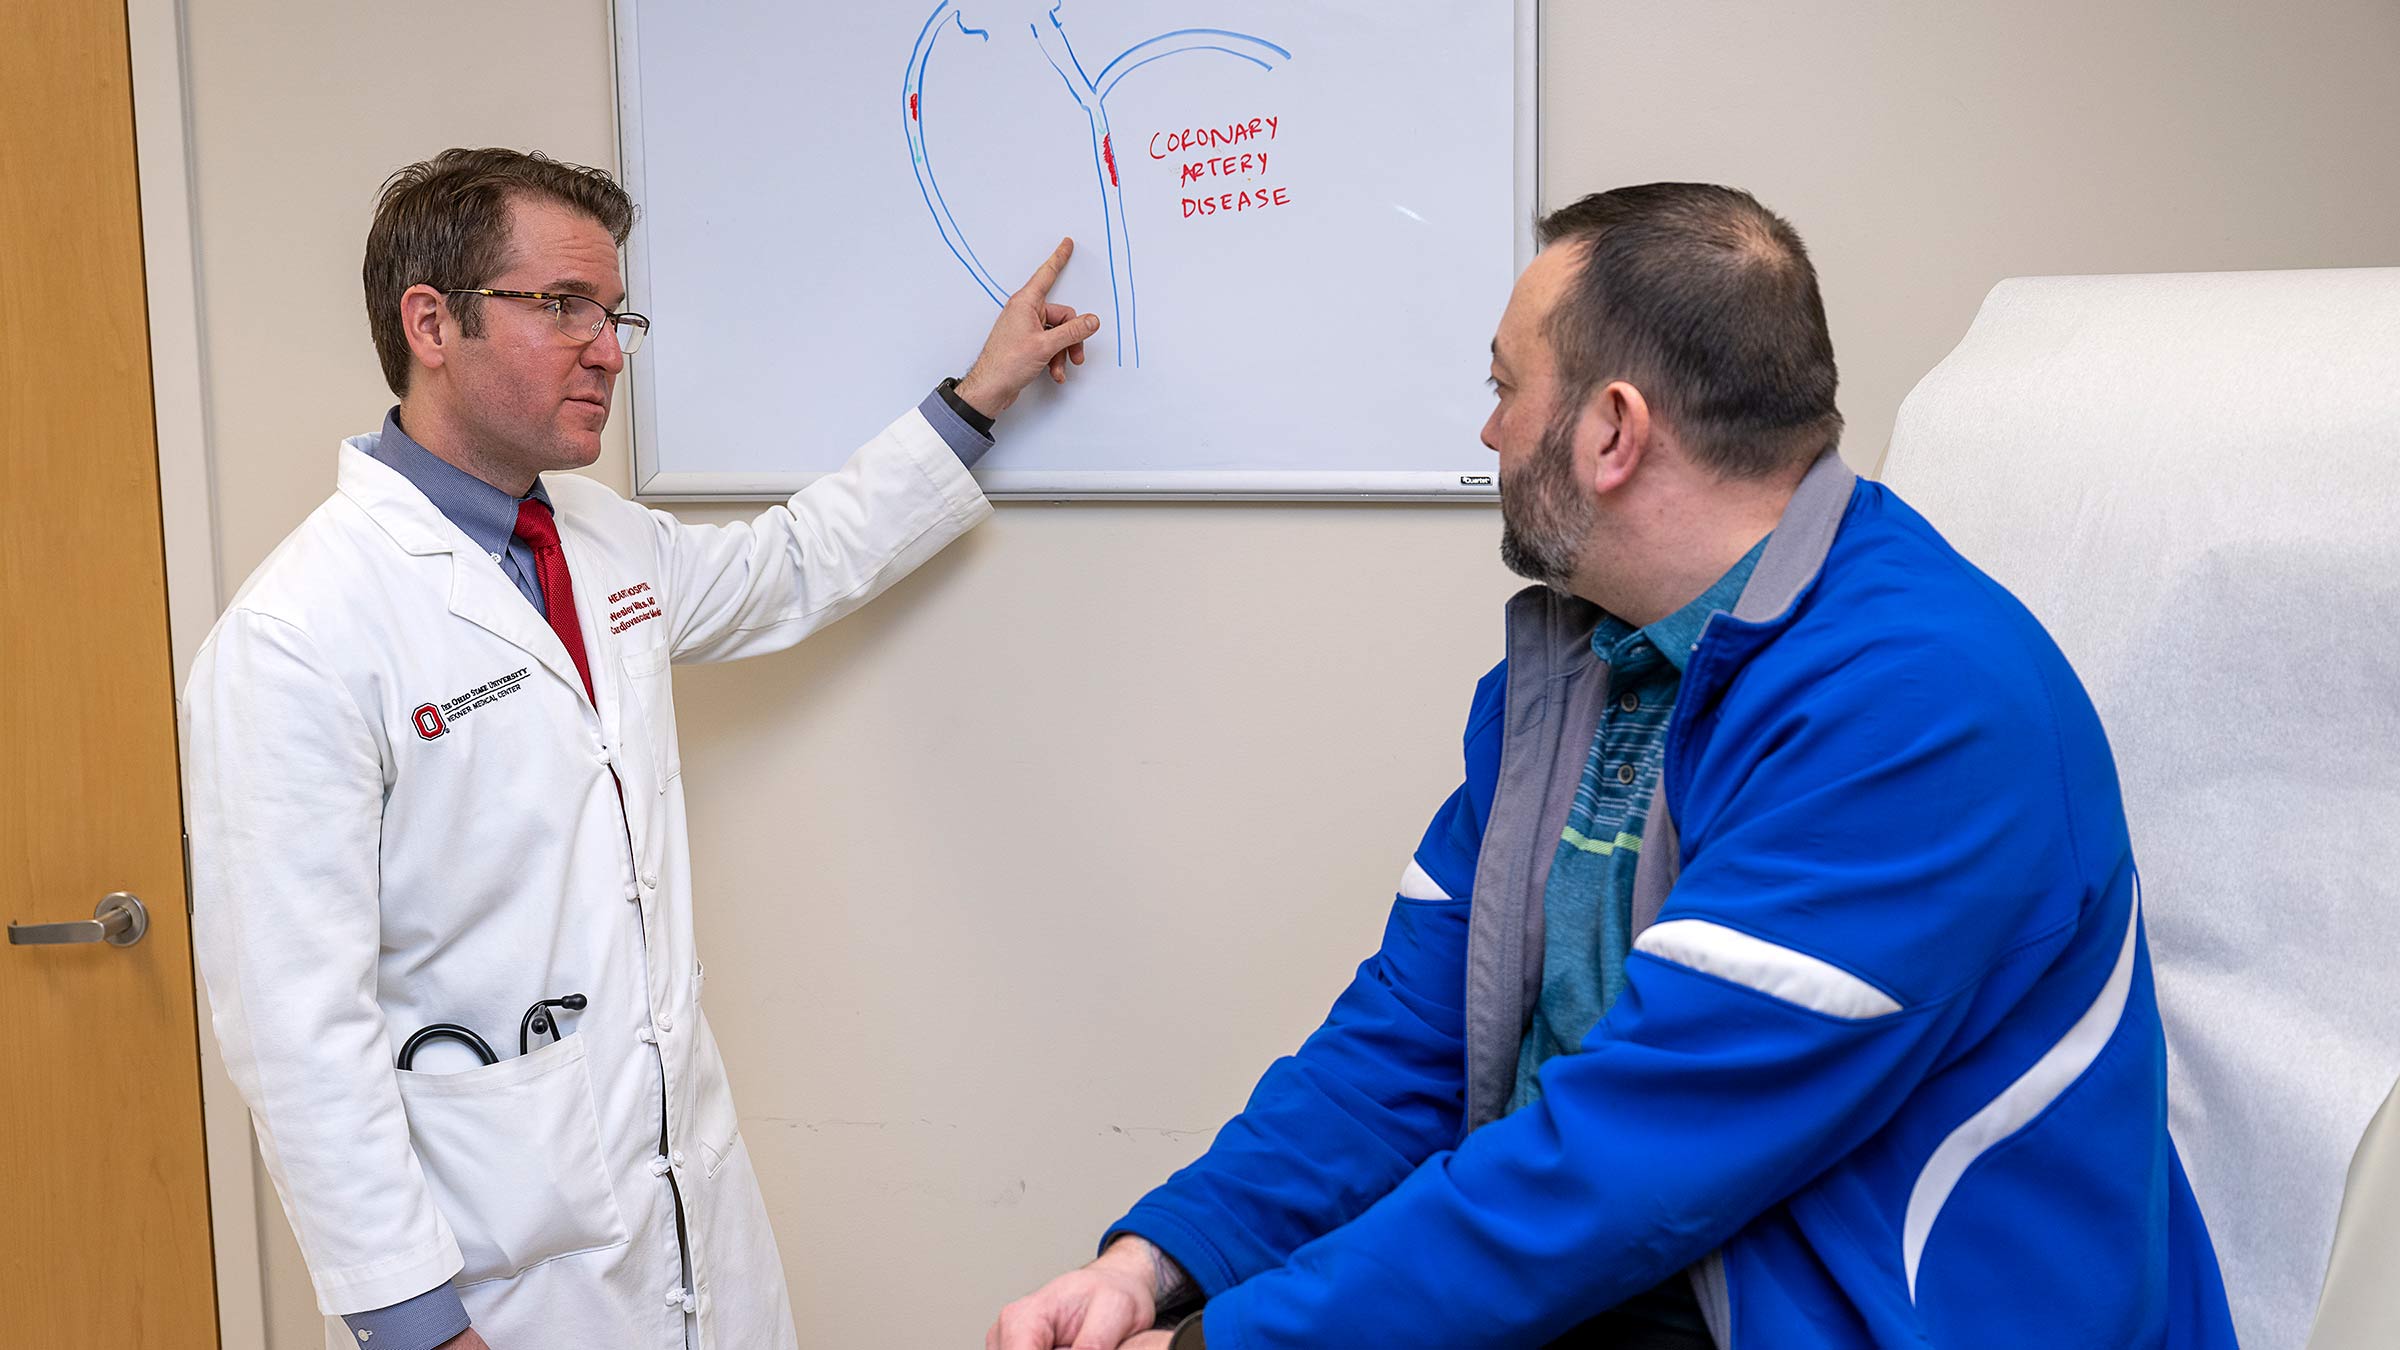 Dr. Milks talking to a patient pointing to a whiteboard